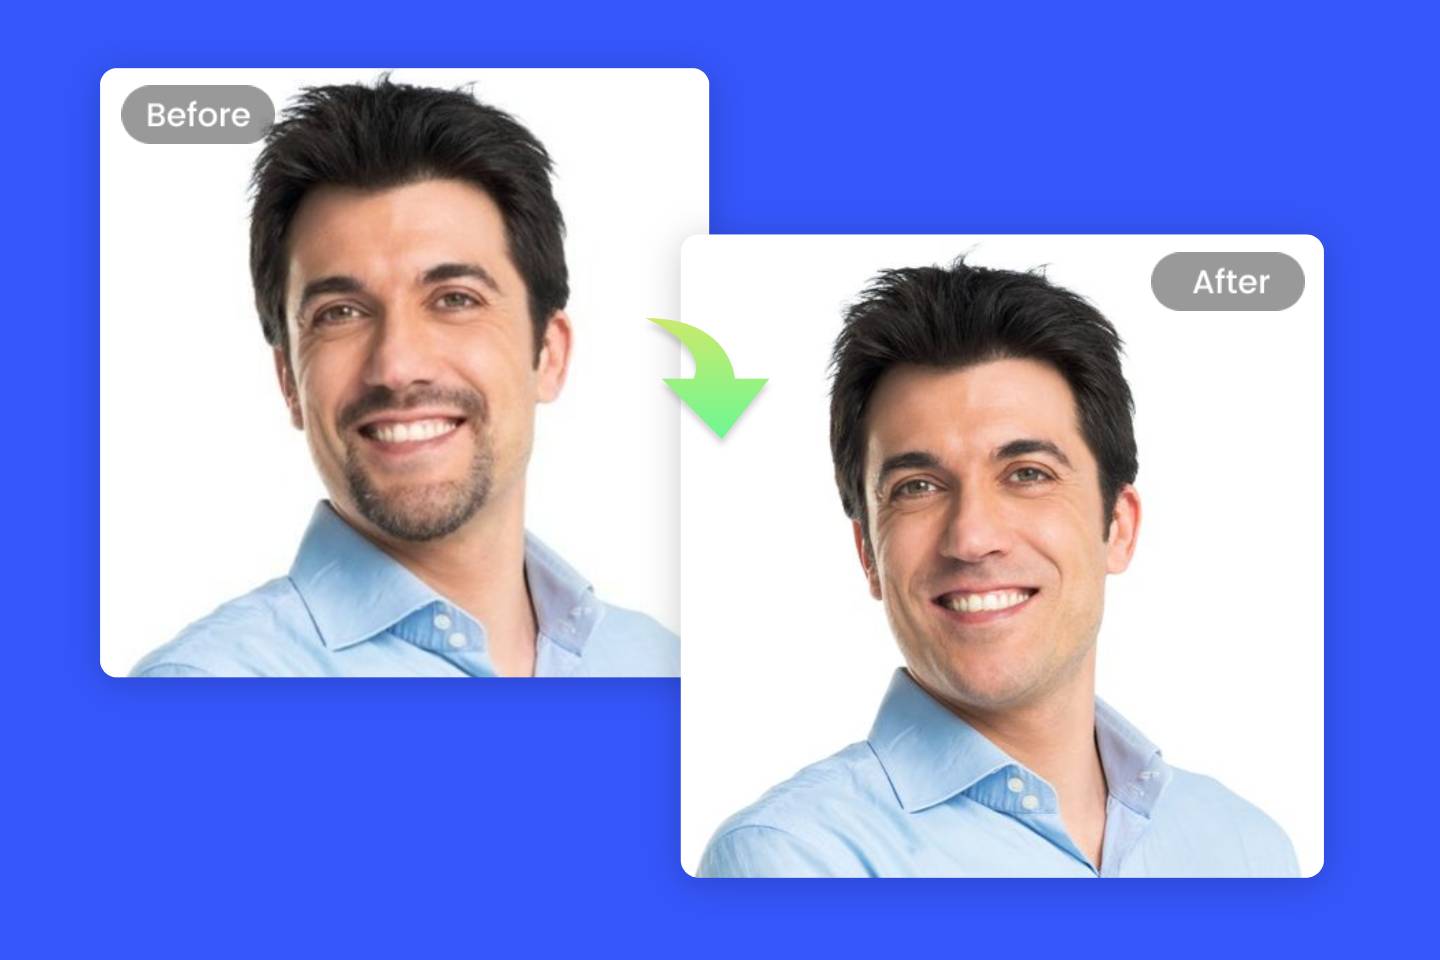 No beard filter banner with before and after contrast photo with a man